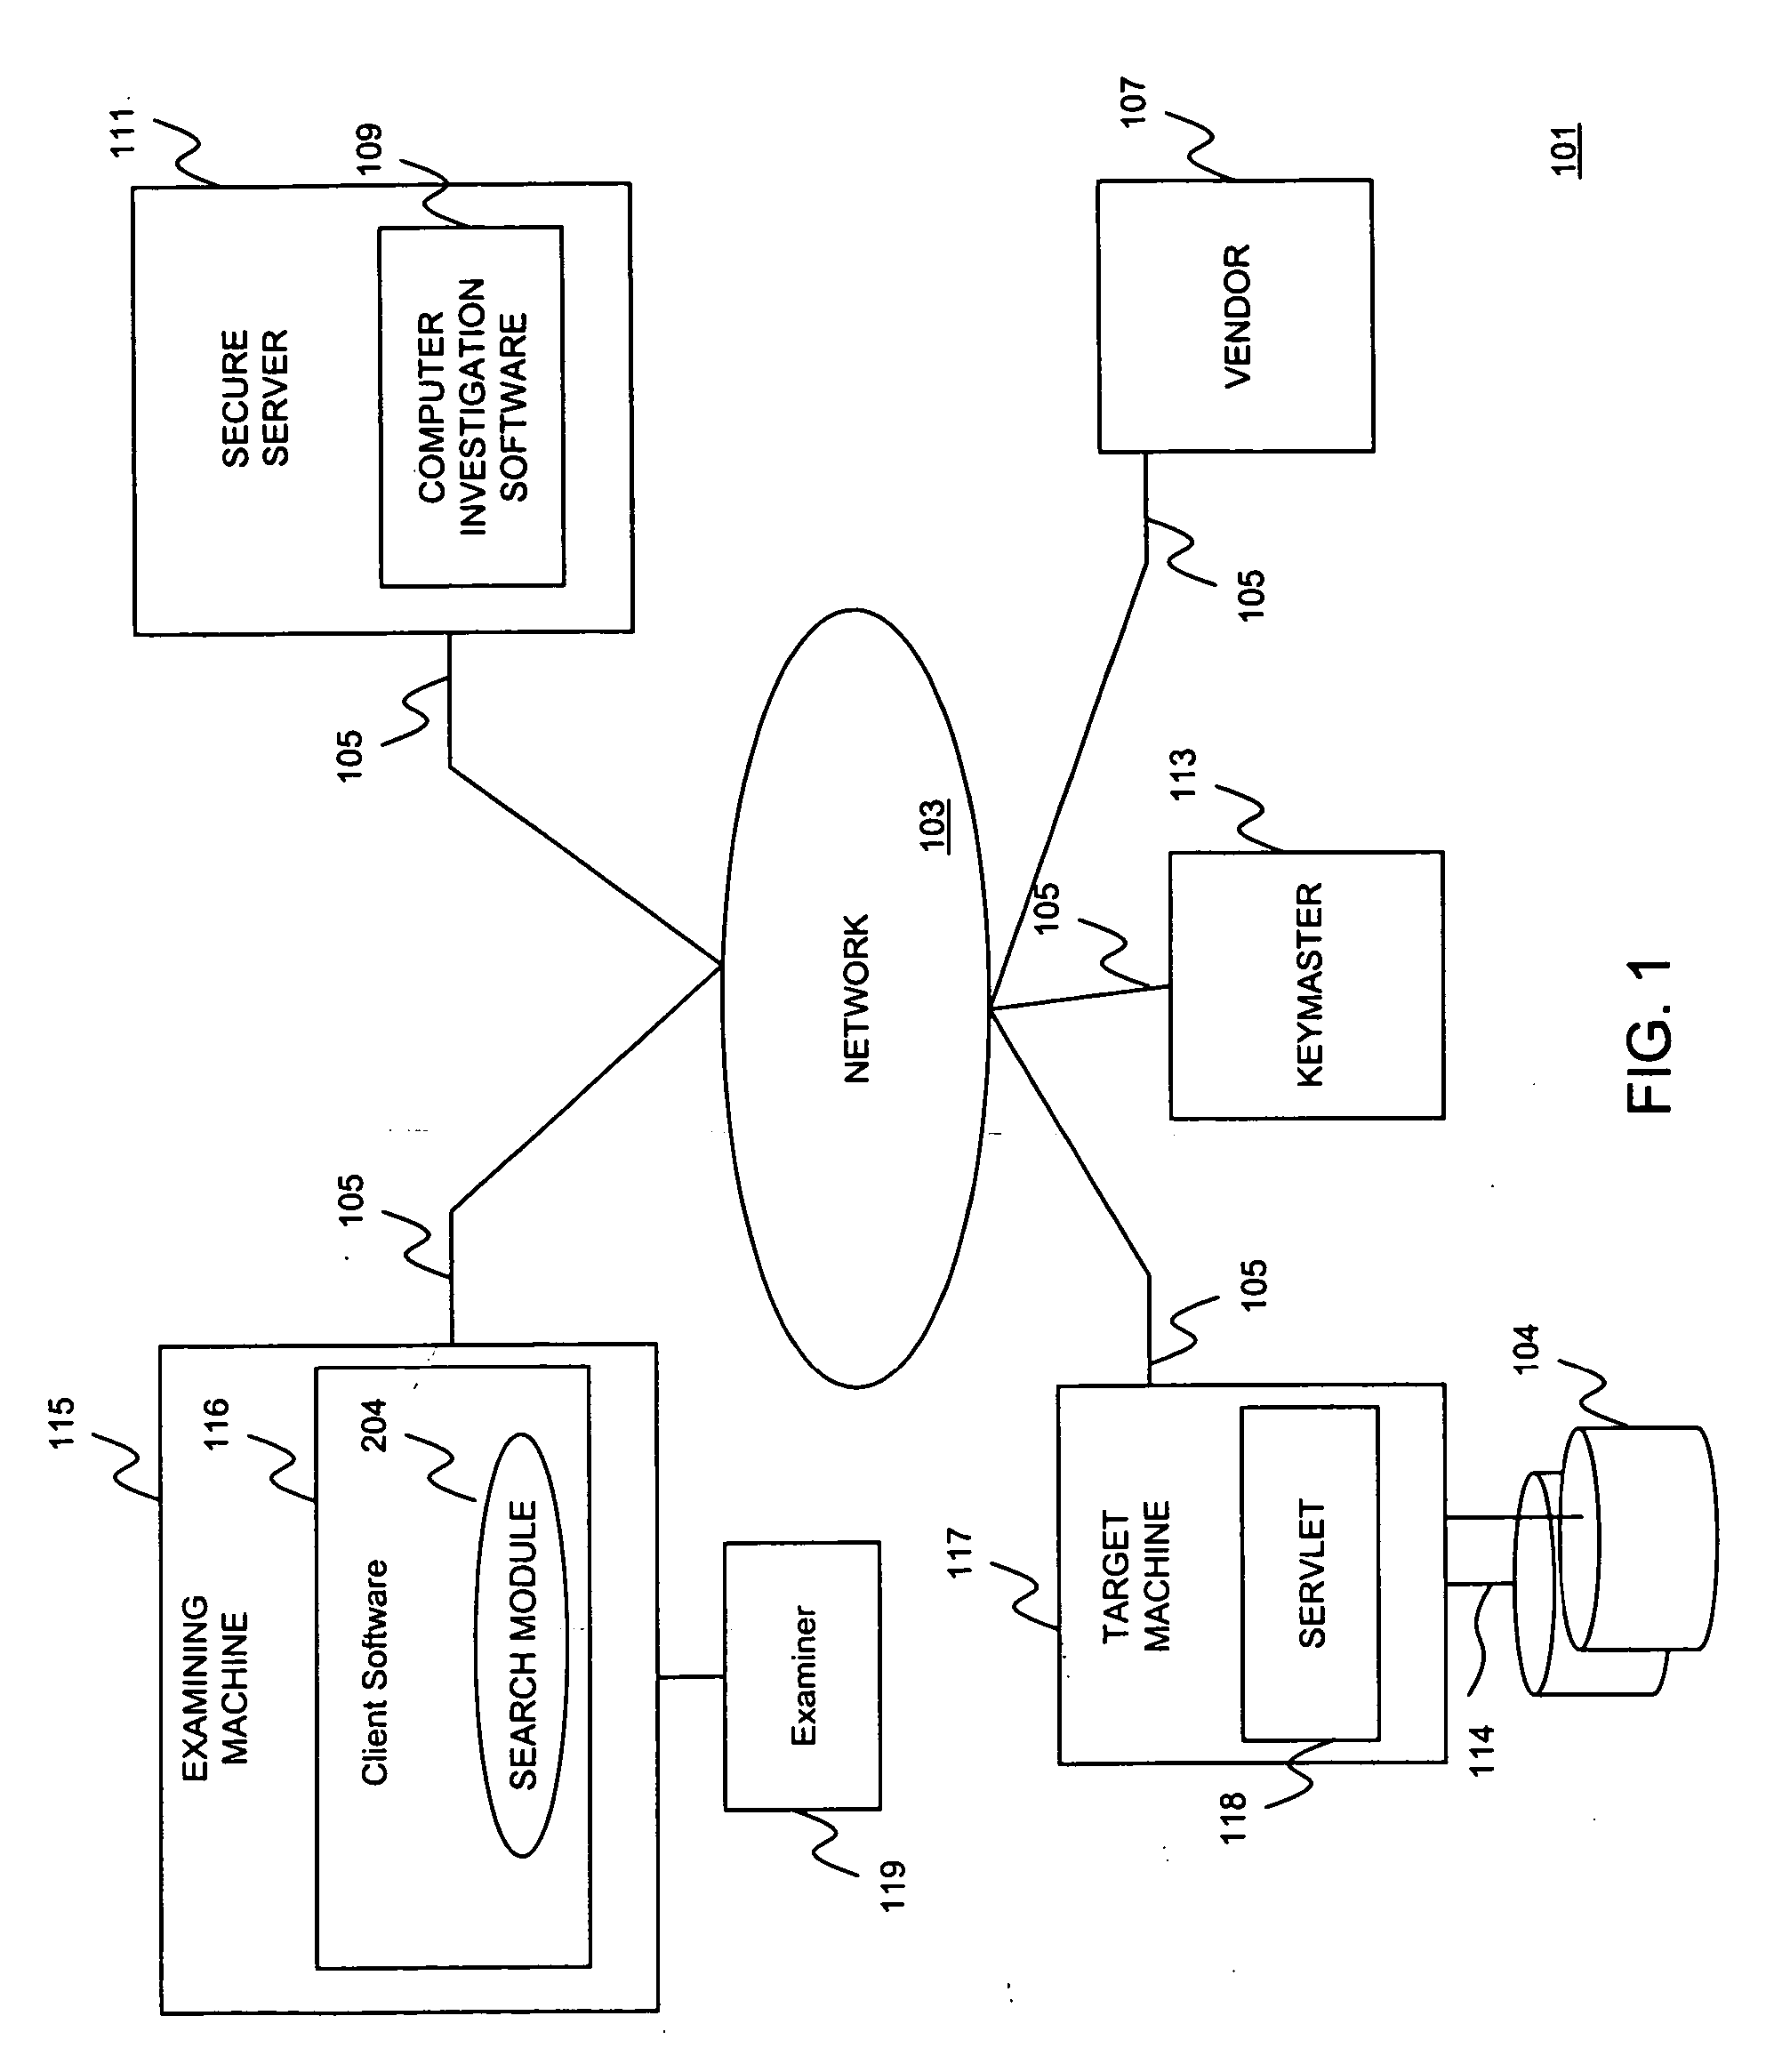 System and method for searching for static data in a computer investigation system